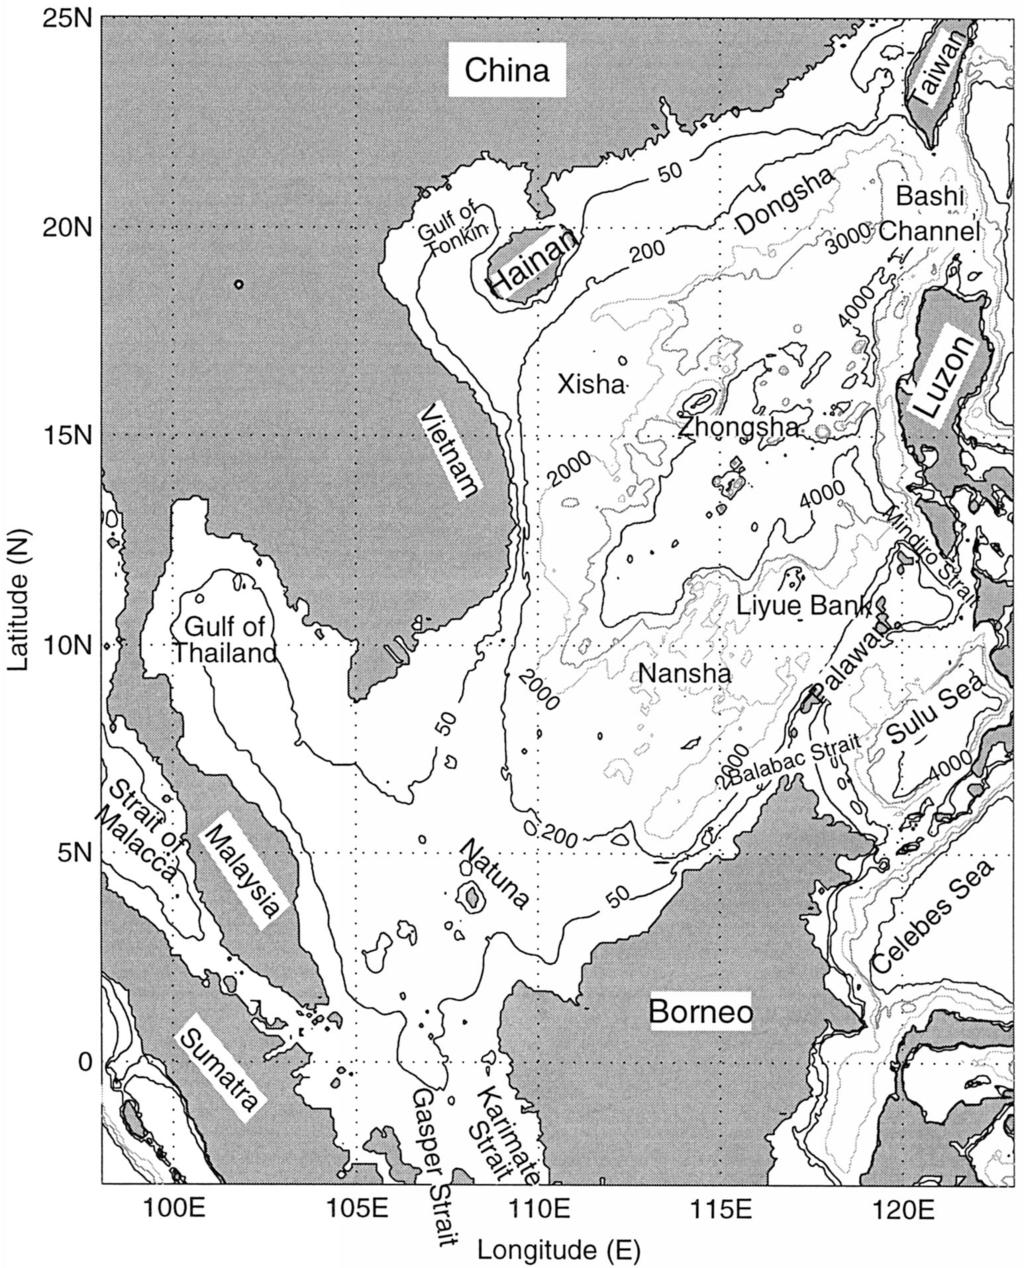 1522 JOURNAL OF ATMOSPHERIC AND OCEANIC TECHNOLOGY VOLUME 18 FIG. 1. Geography and isobaths showing the bottom topography of the South China Sea. Numbers show the depth (m). Chu et al.